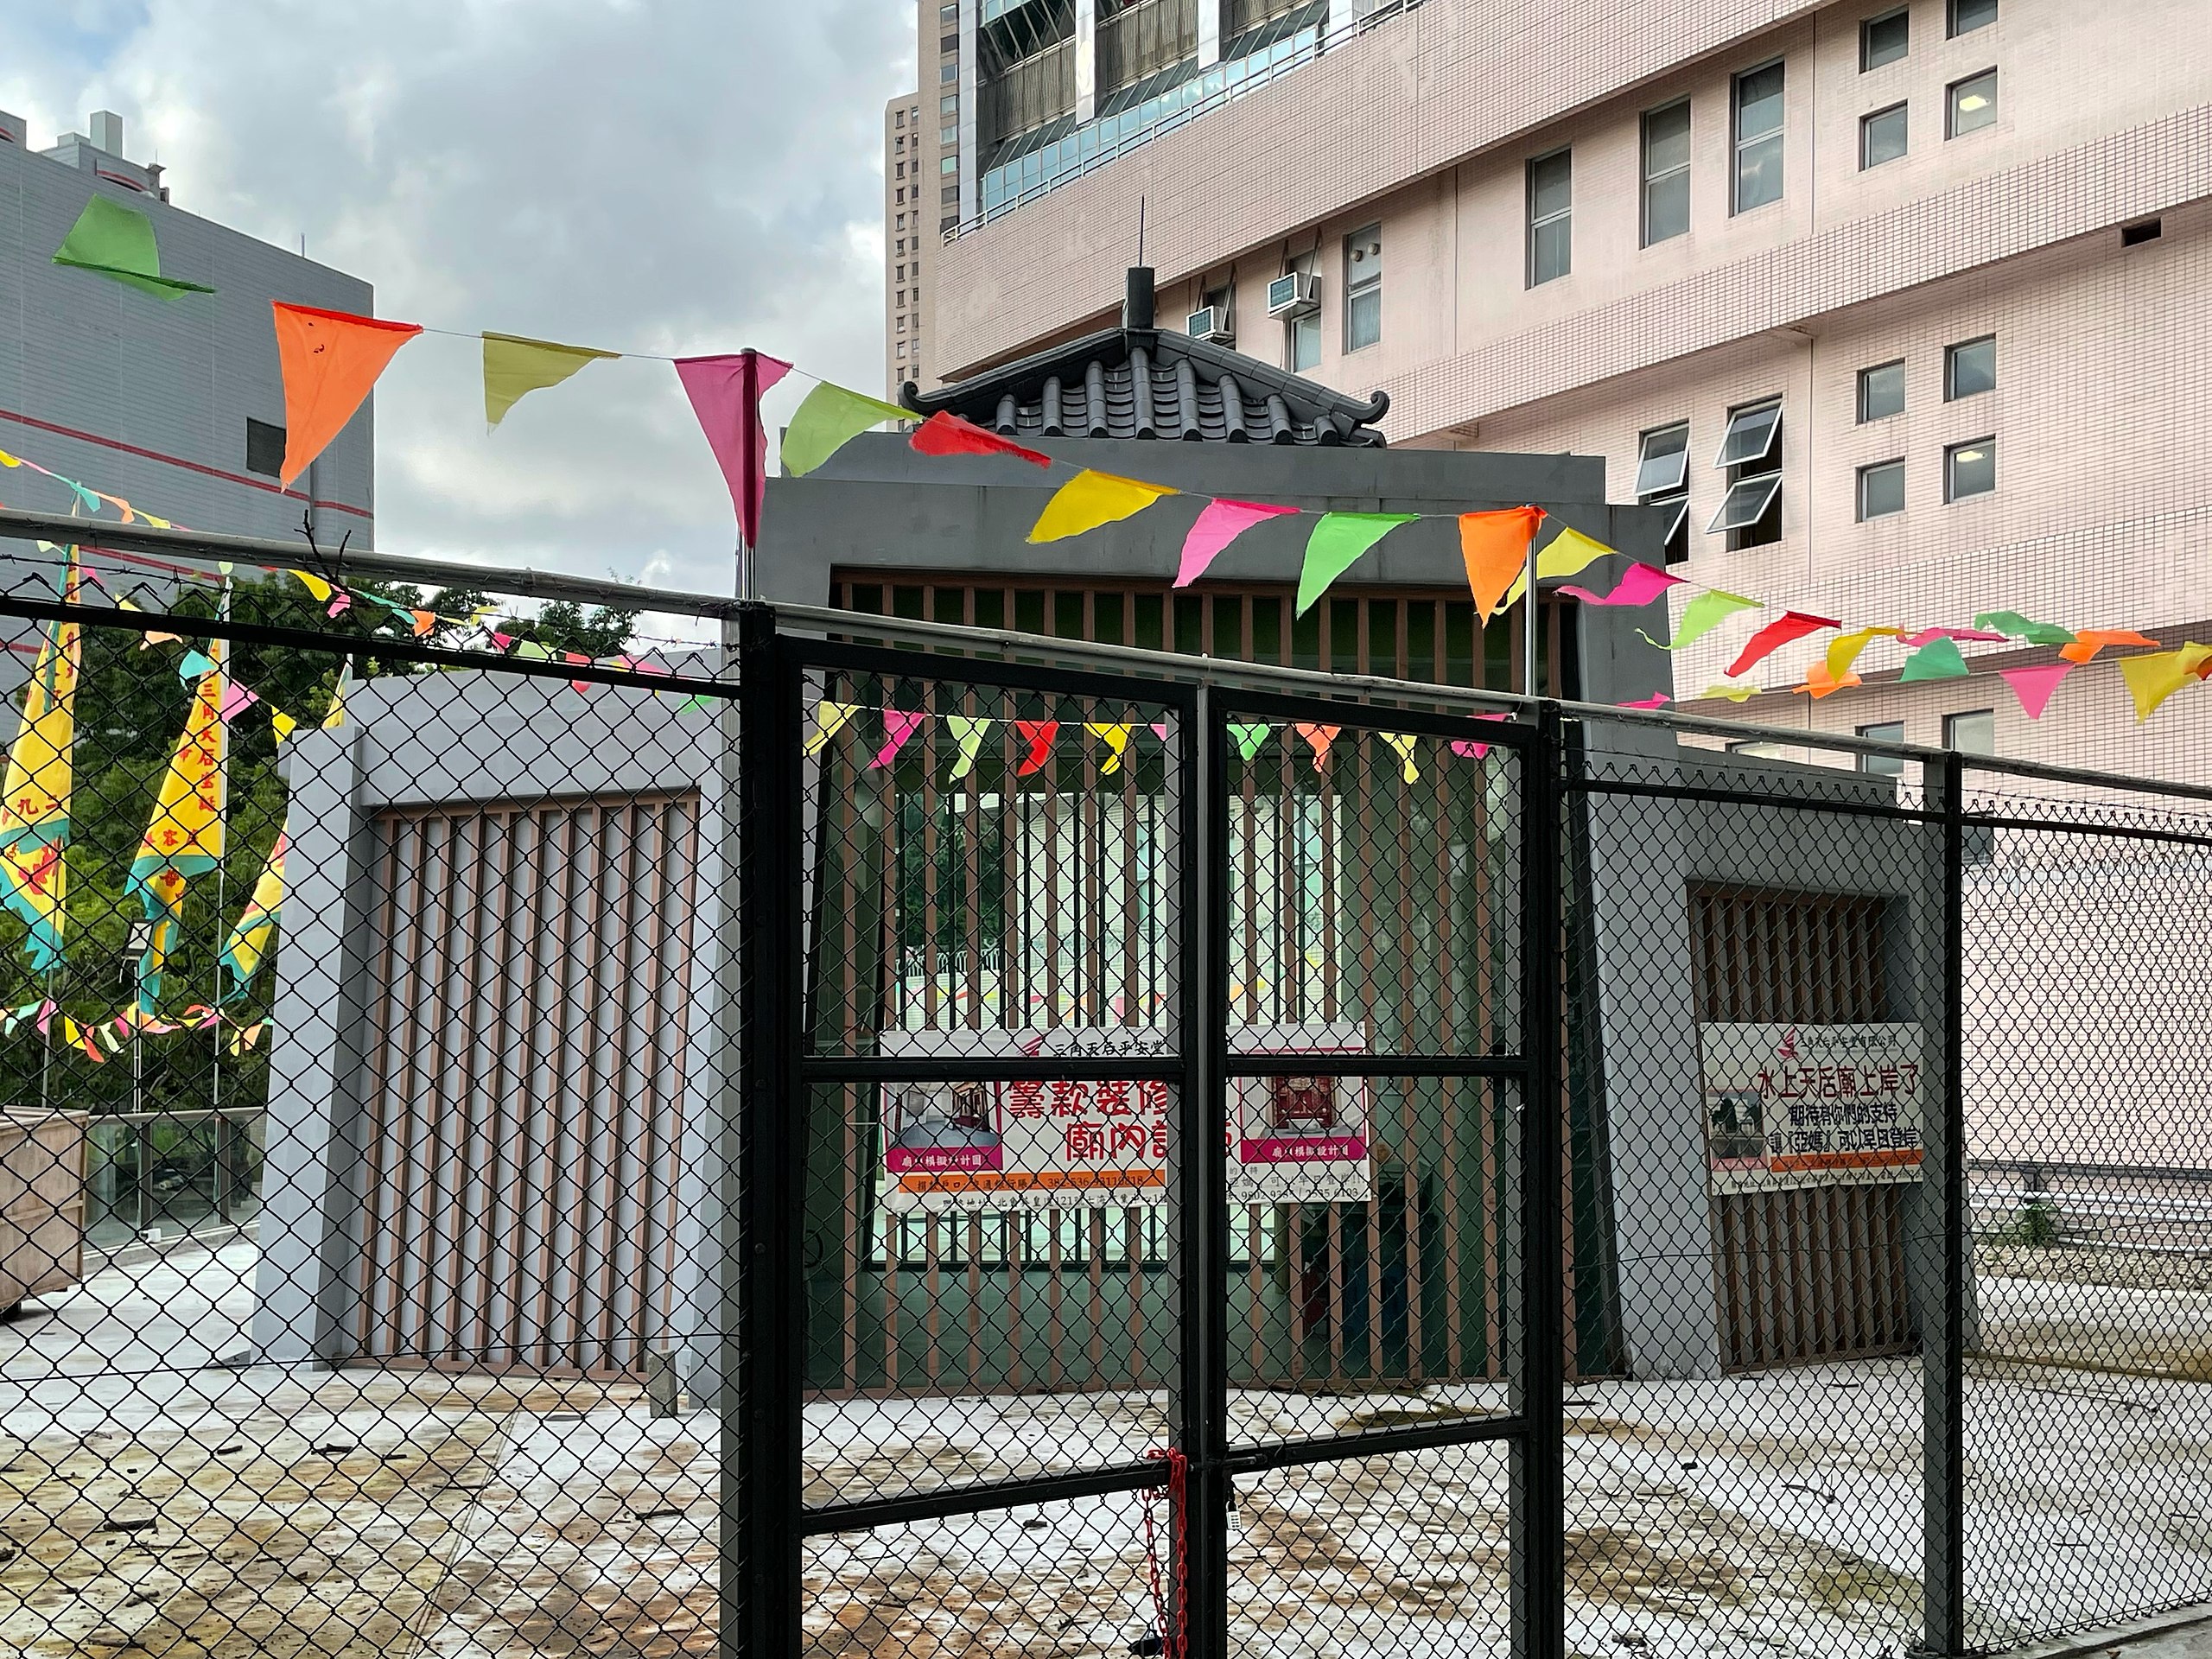 the new location of the former floating tin hau temple next to the tung lo wan fire station